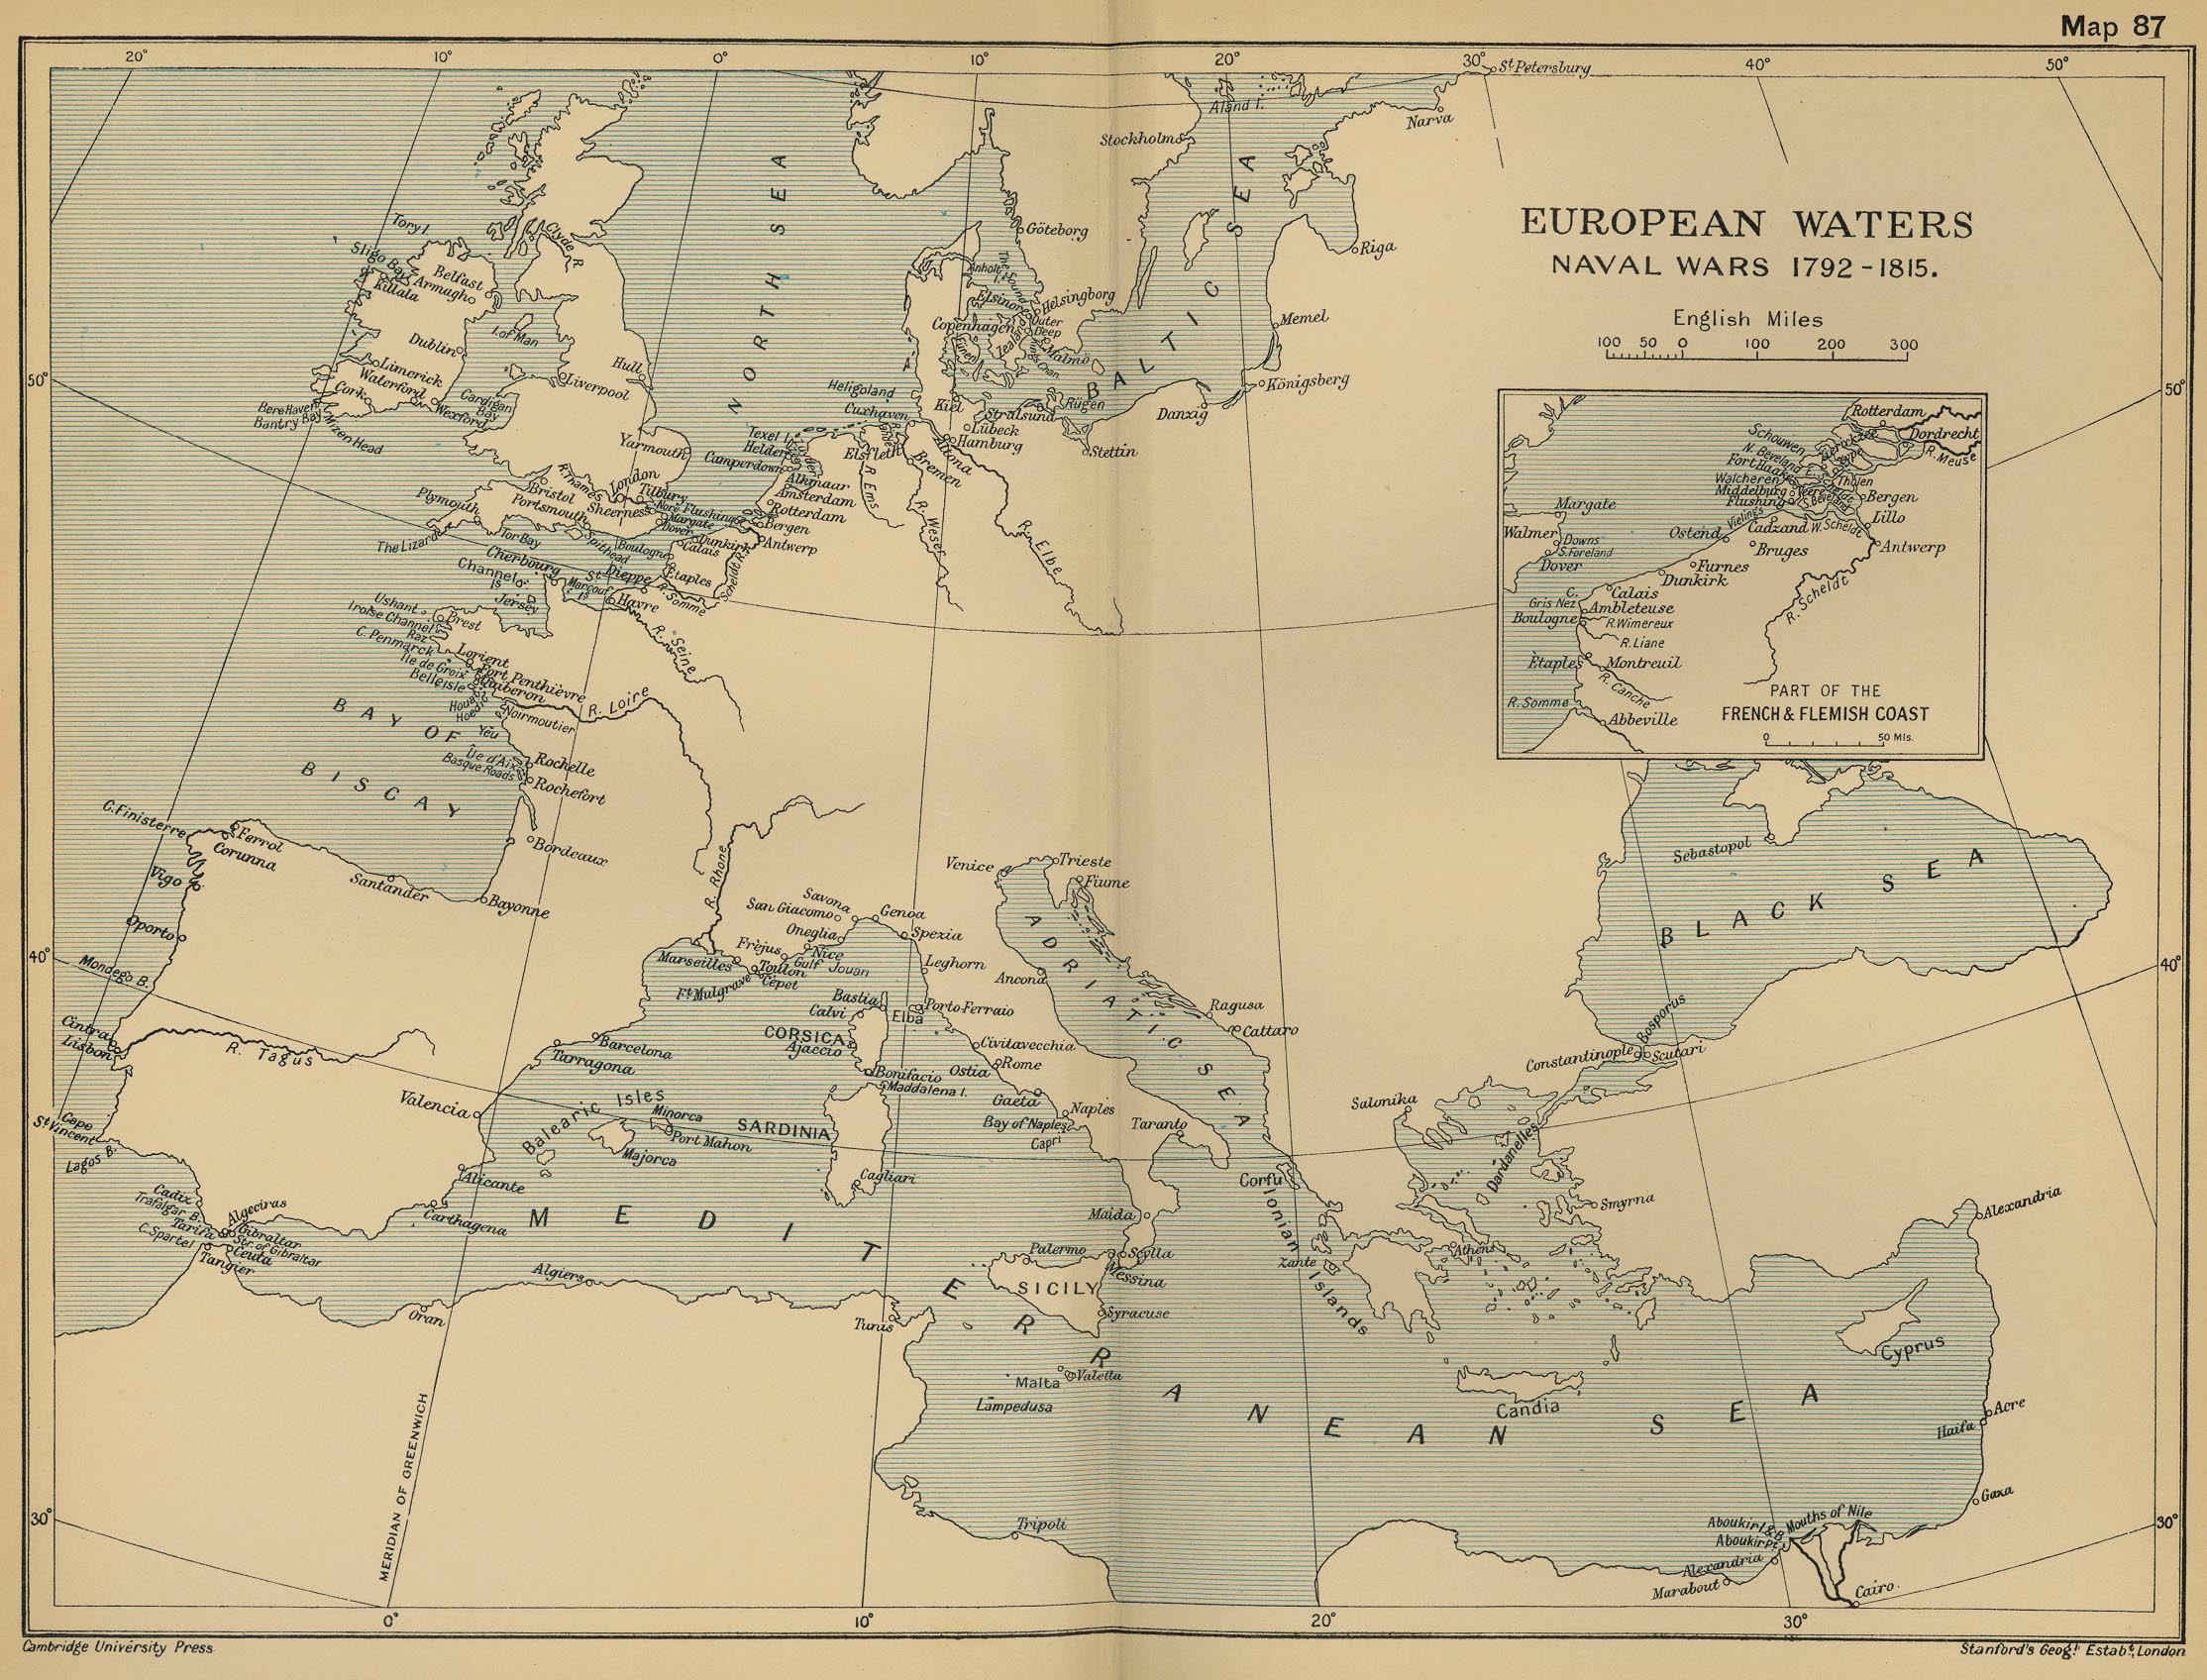 Map of the European Waters 1792-1815